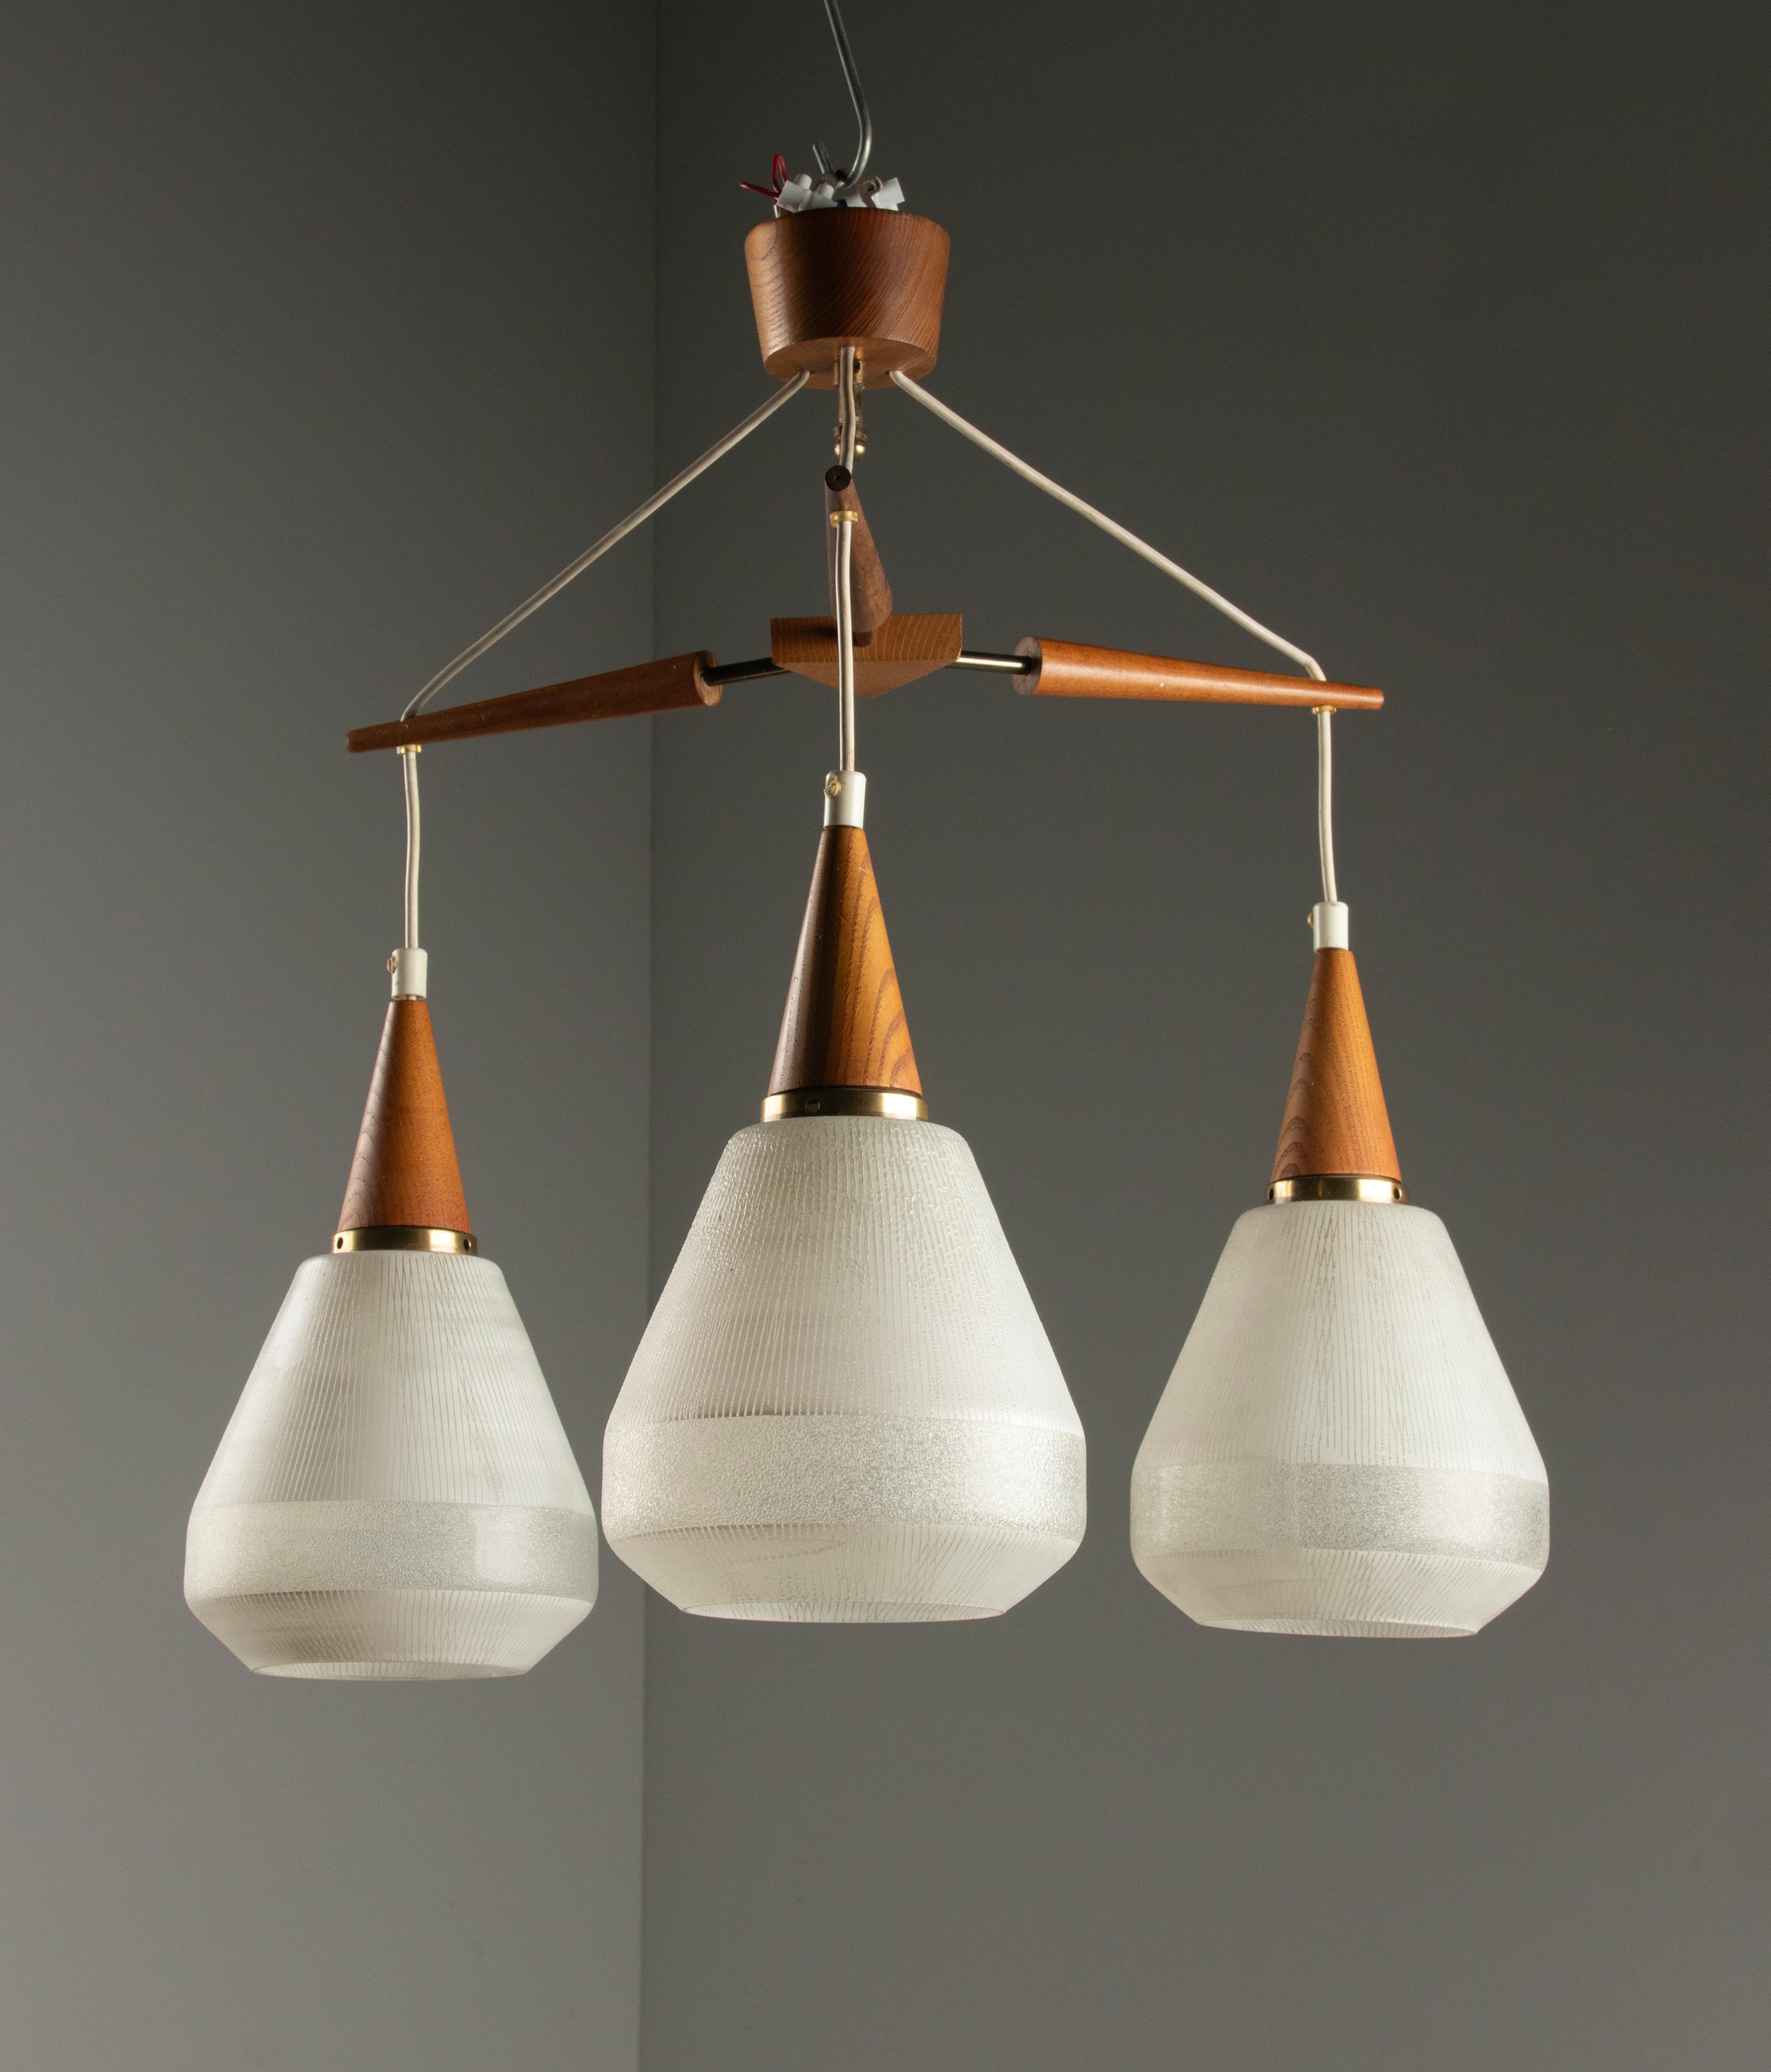 Mid 20th Century Danish Teakwood Pendant Lamp - Frosted Glass Shades For Sale 4